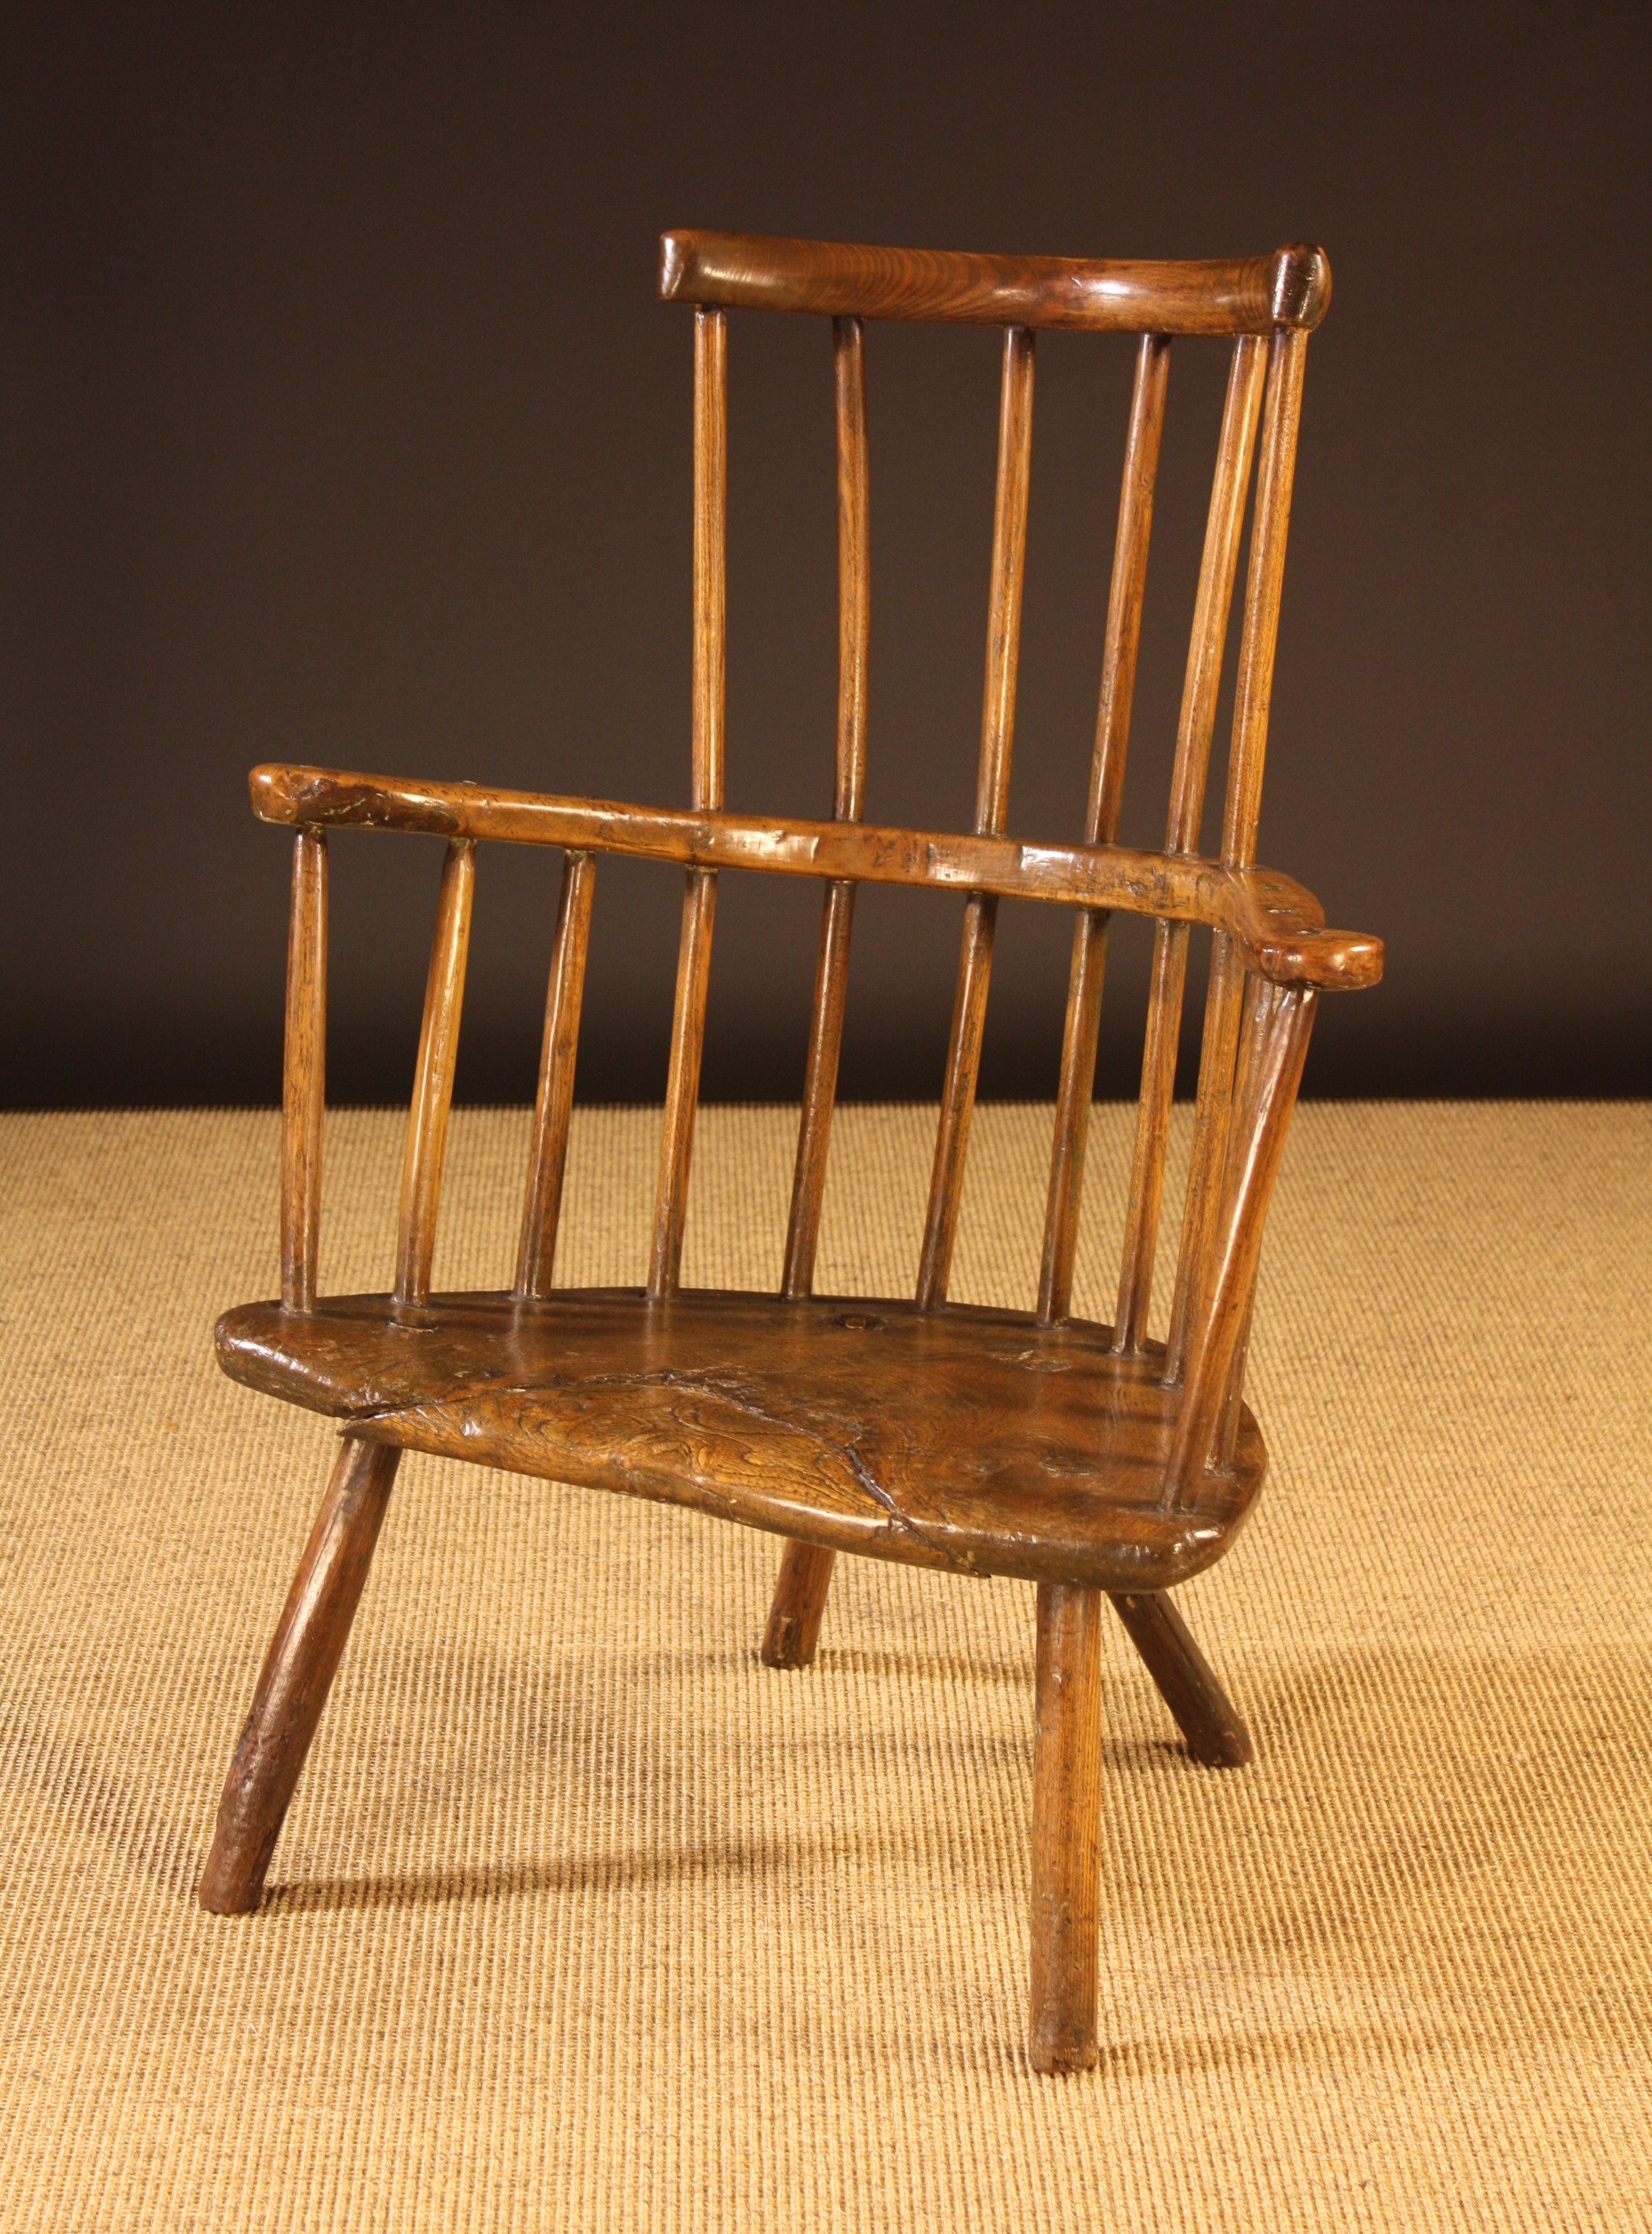 A Late 18th/Early 19th Century Primitive Ash Comb-back Windsor Armchair.  The curved top rail